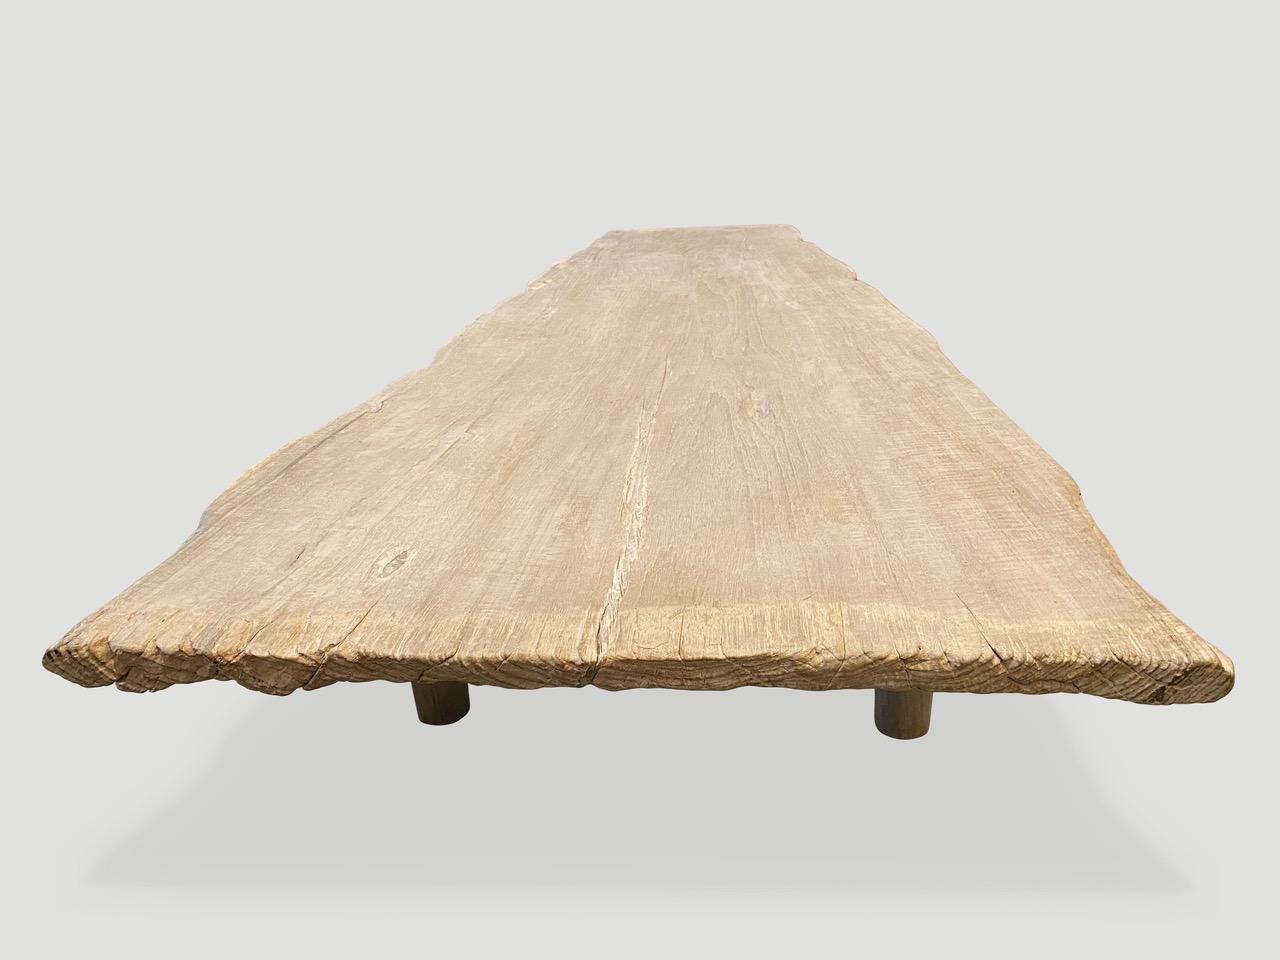 Contemporary Andrianna Shamaris White Washed Live Edge Teak Wood Coffee Table or Bench For Sale